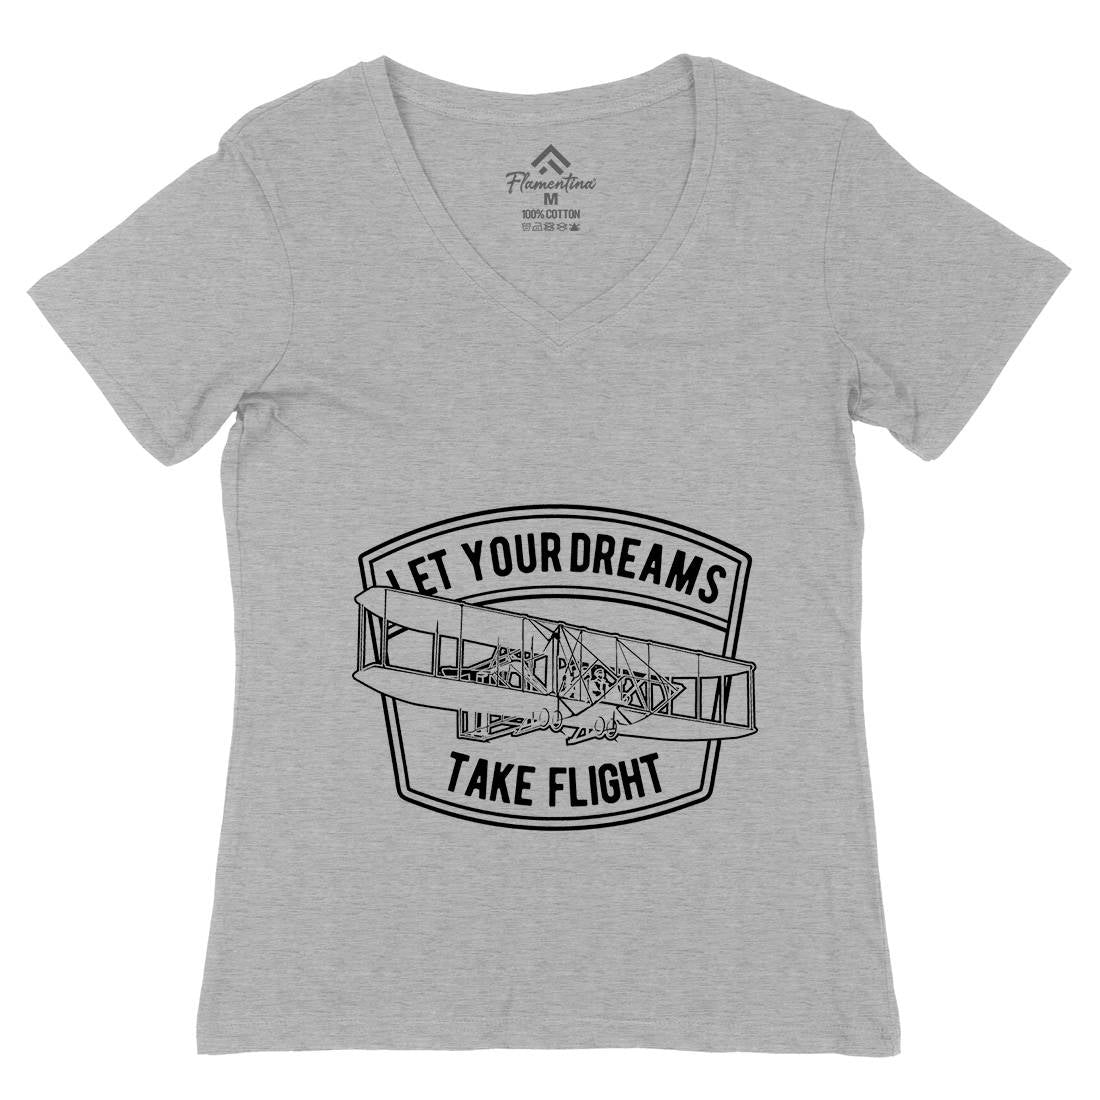 Let Your Dreams Womens Organic V-Neck T-Shirt Vehicles A706